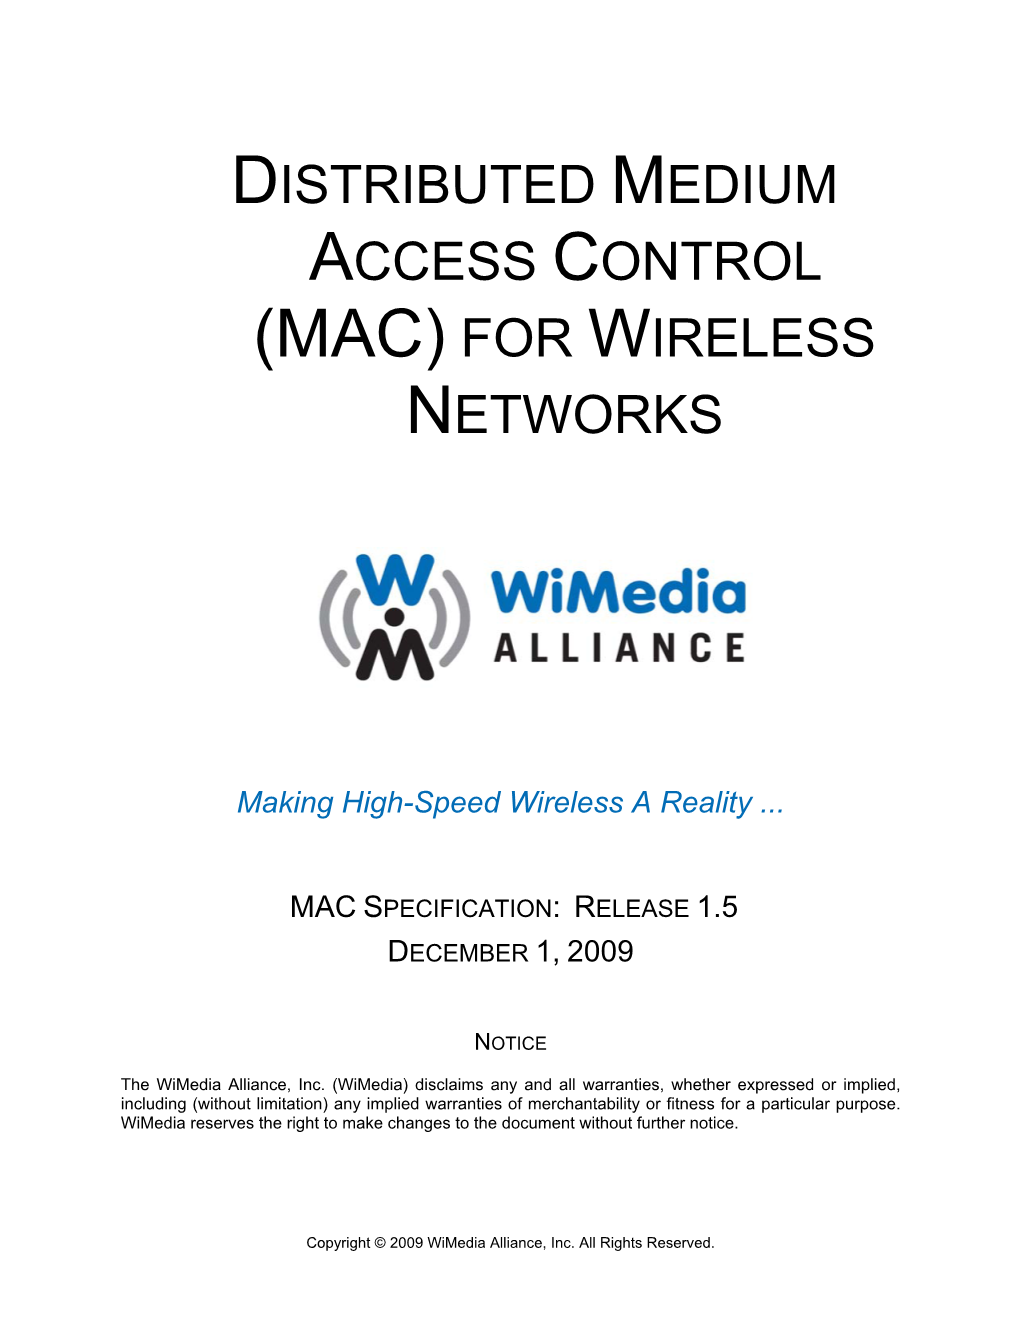 Distributed Medium Access Control (Mac) for Wireless Networks